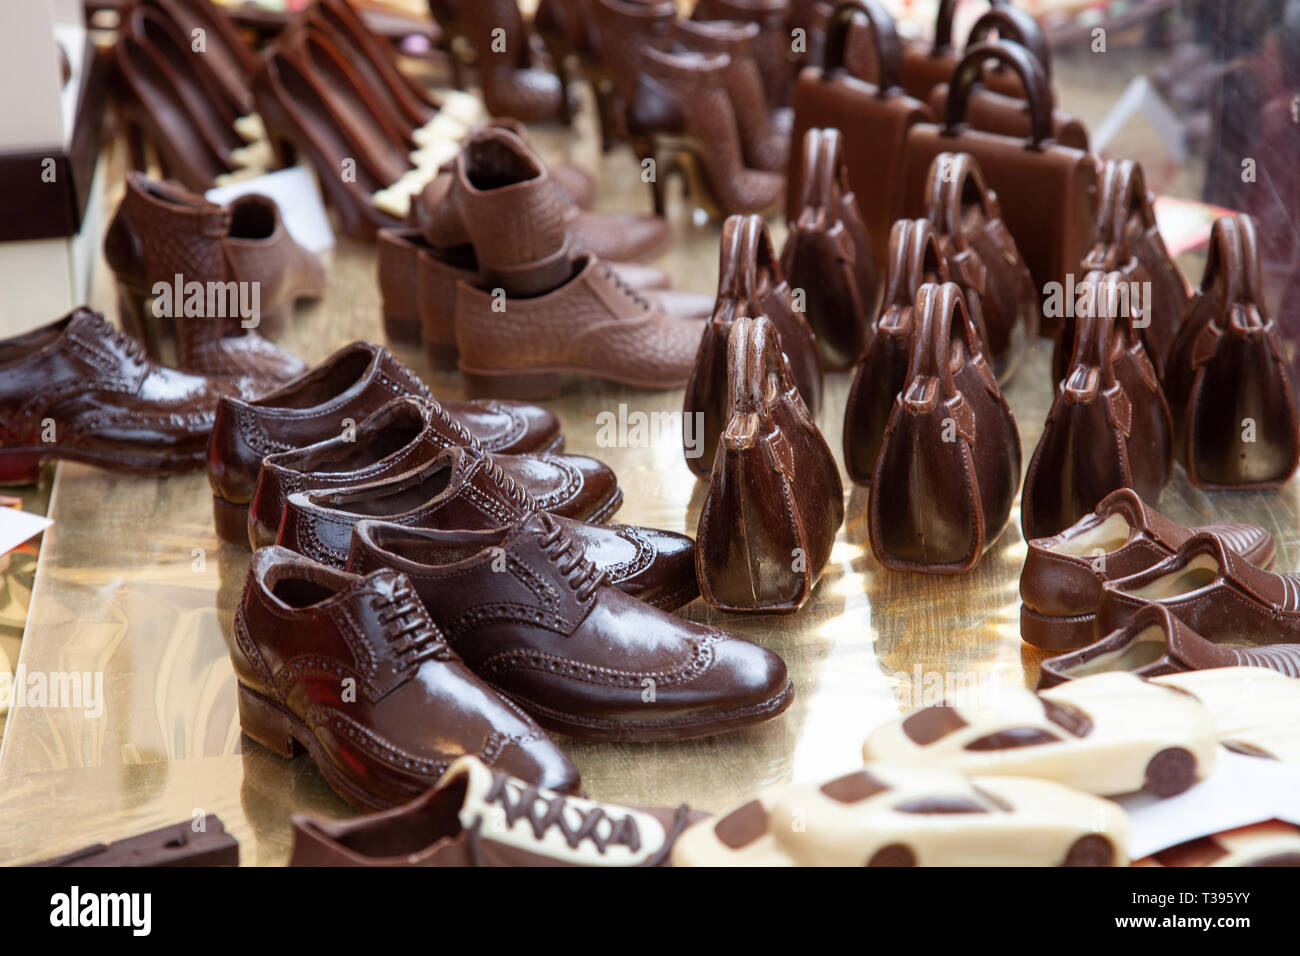 Neuwied, Germany - April 6, 2019: chocolate and other sweets on the Chocolate festival Stock Photo